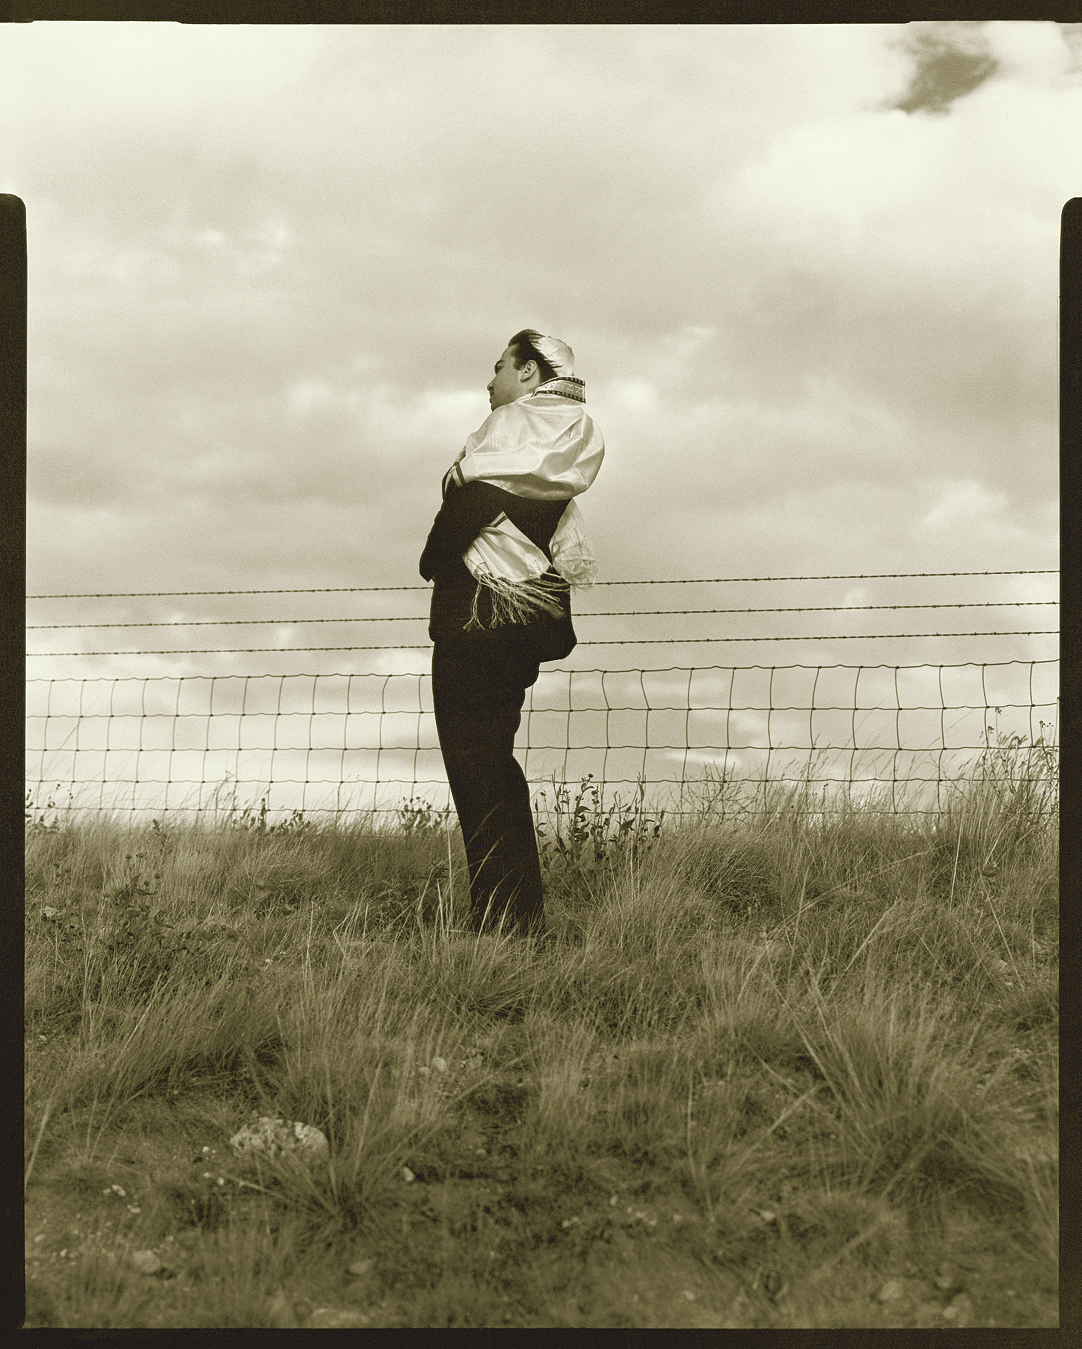 Full body photograph depicting man in kippah and prayer shawl standing in a field next to fence, facing to the side.